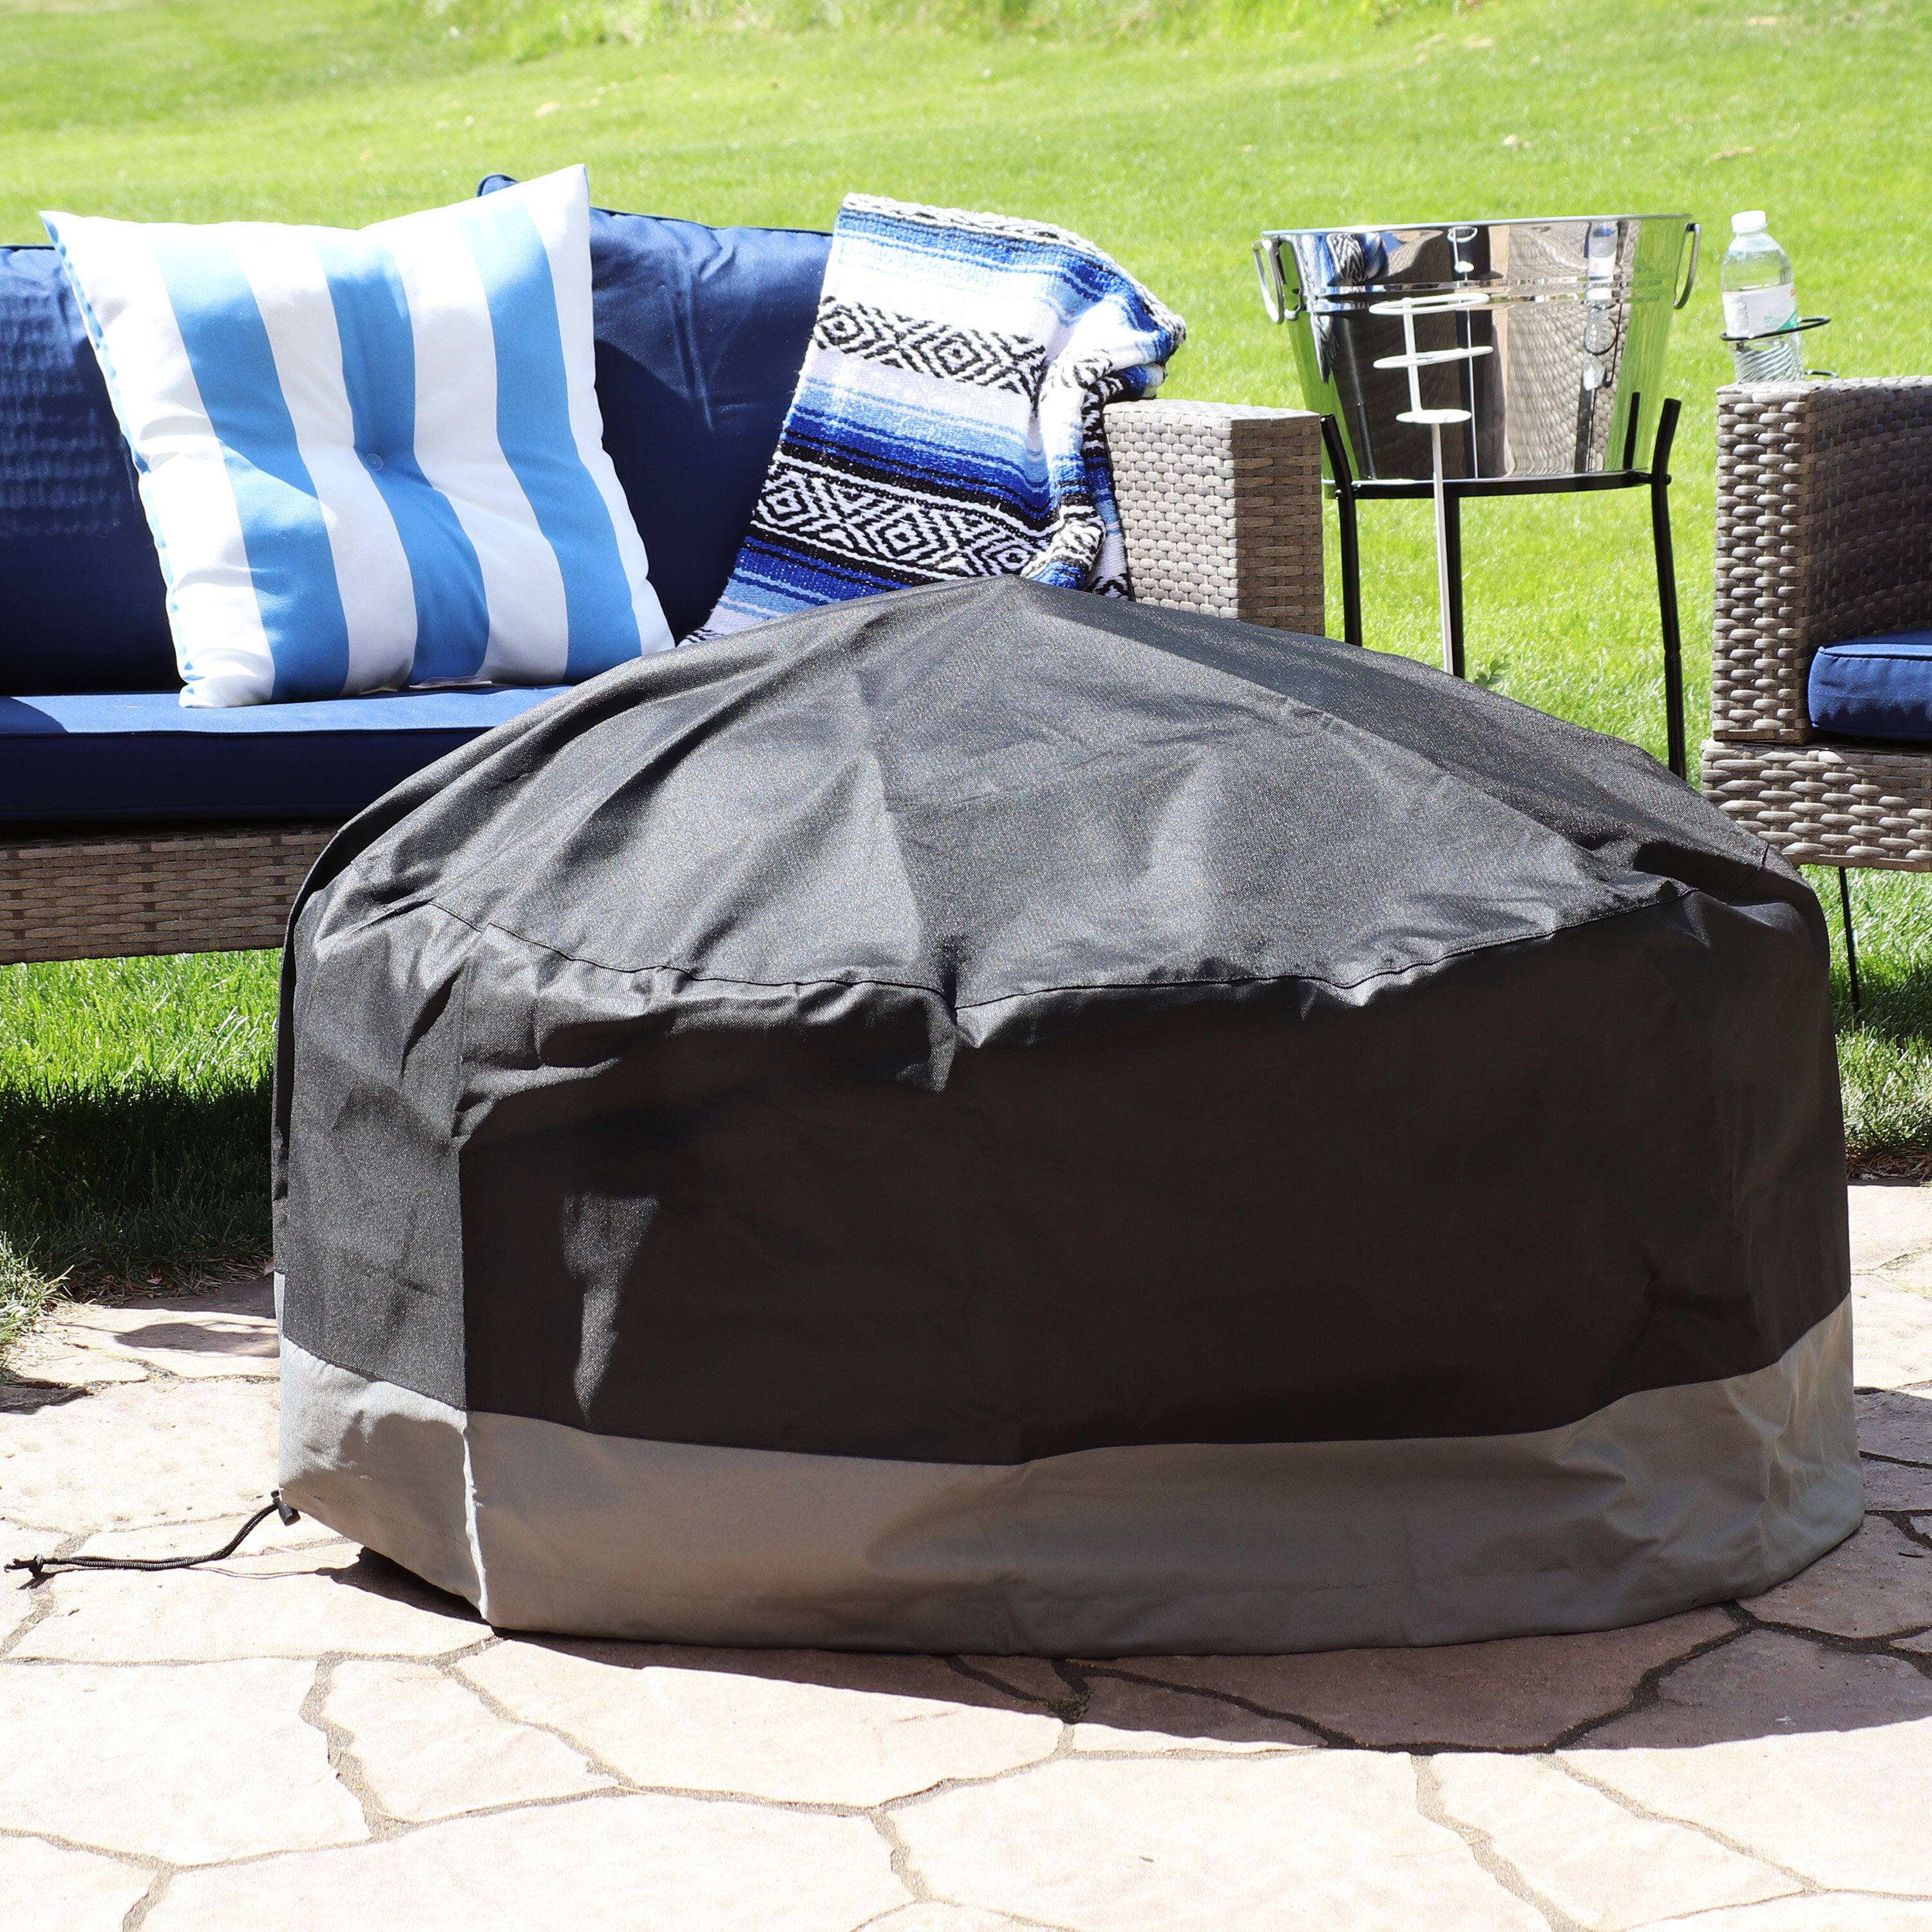 Black Patio Round Fire Pit Cover Waterproof UV Protector Grill BBQ Cover Outdoor 